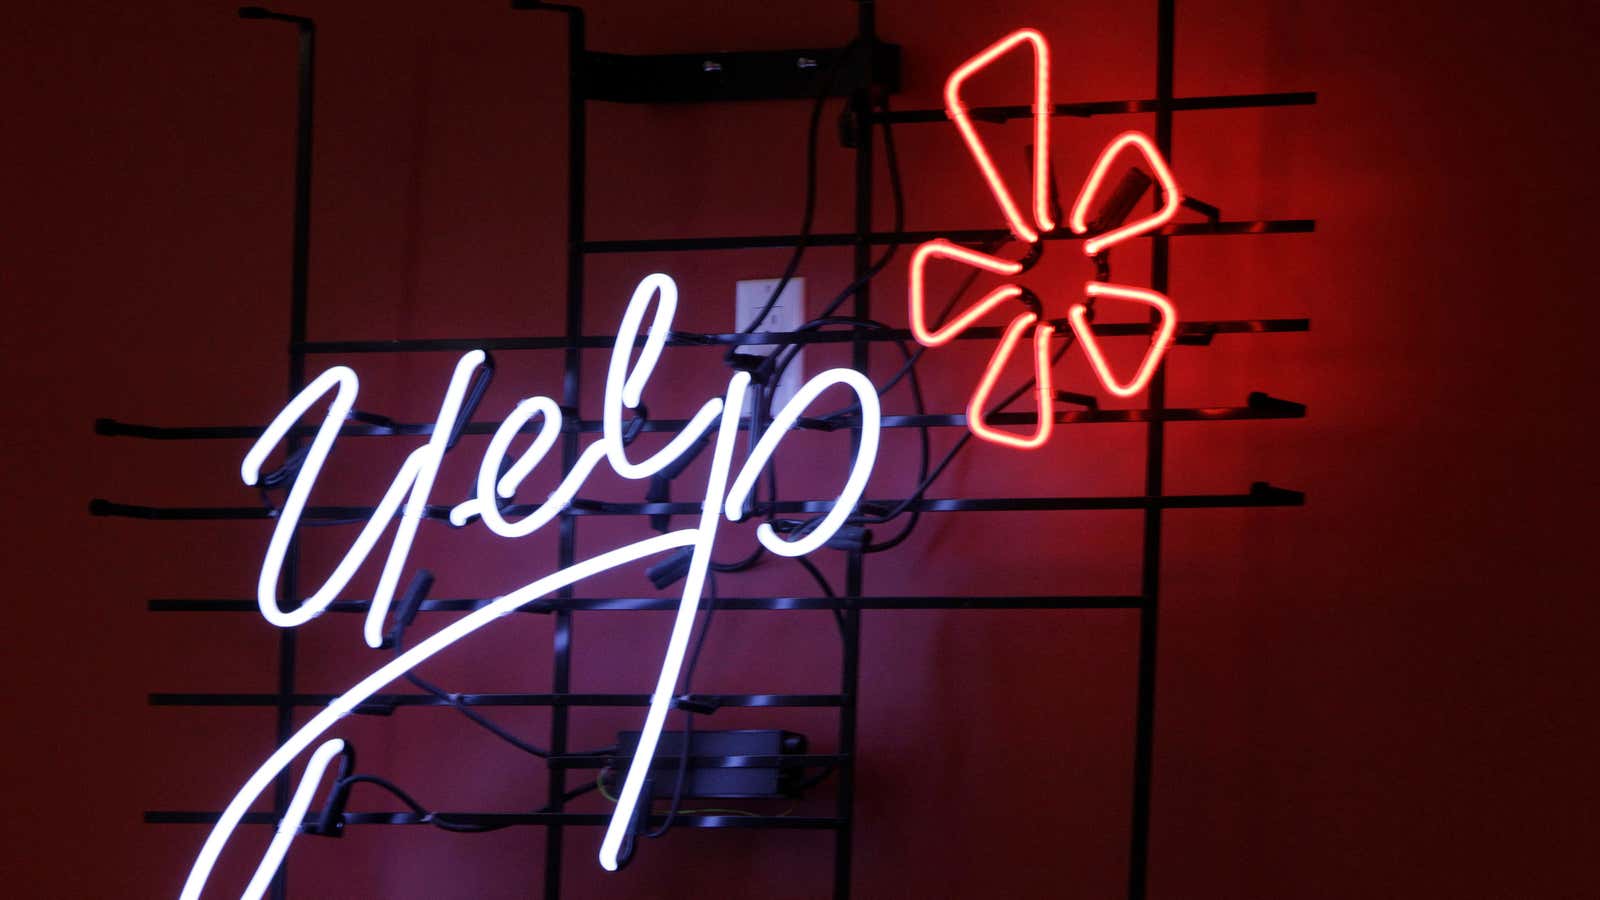 Hiring challenges are stalling Yelp’s growth.